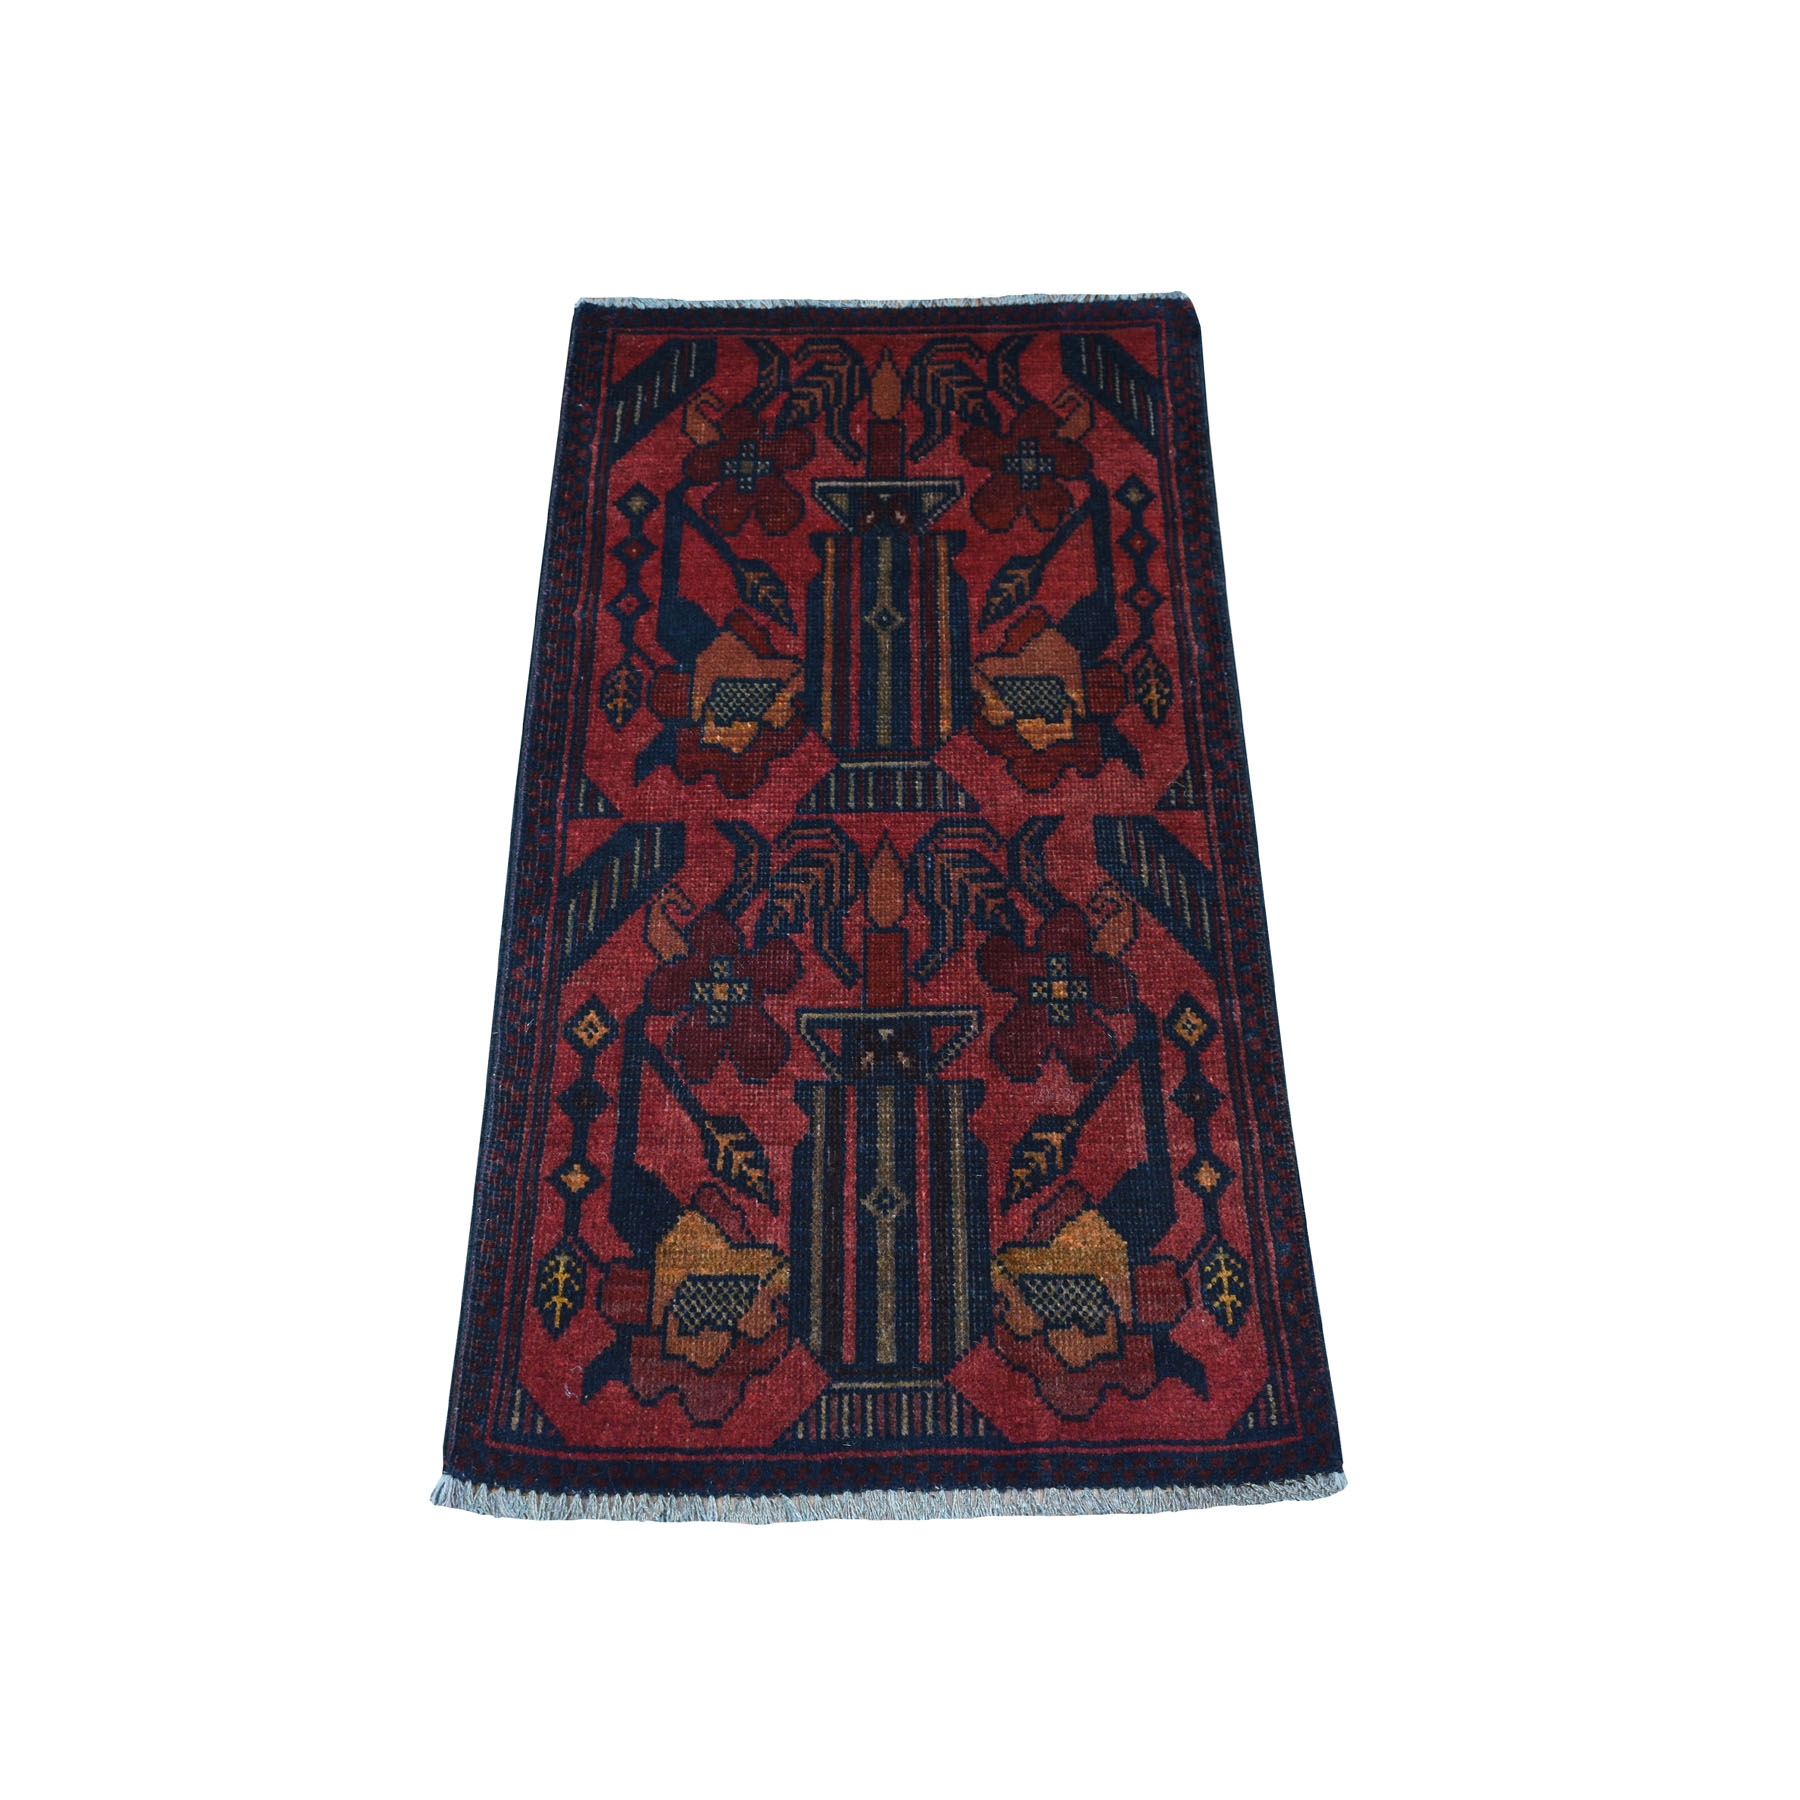 1'8"X3'3" Deep And Saturated Red Tribal Afghan Andkhoy Pure Wool Hand Knotted Oriental Rug moaec7b8